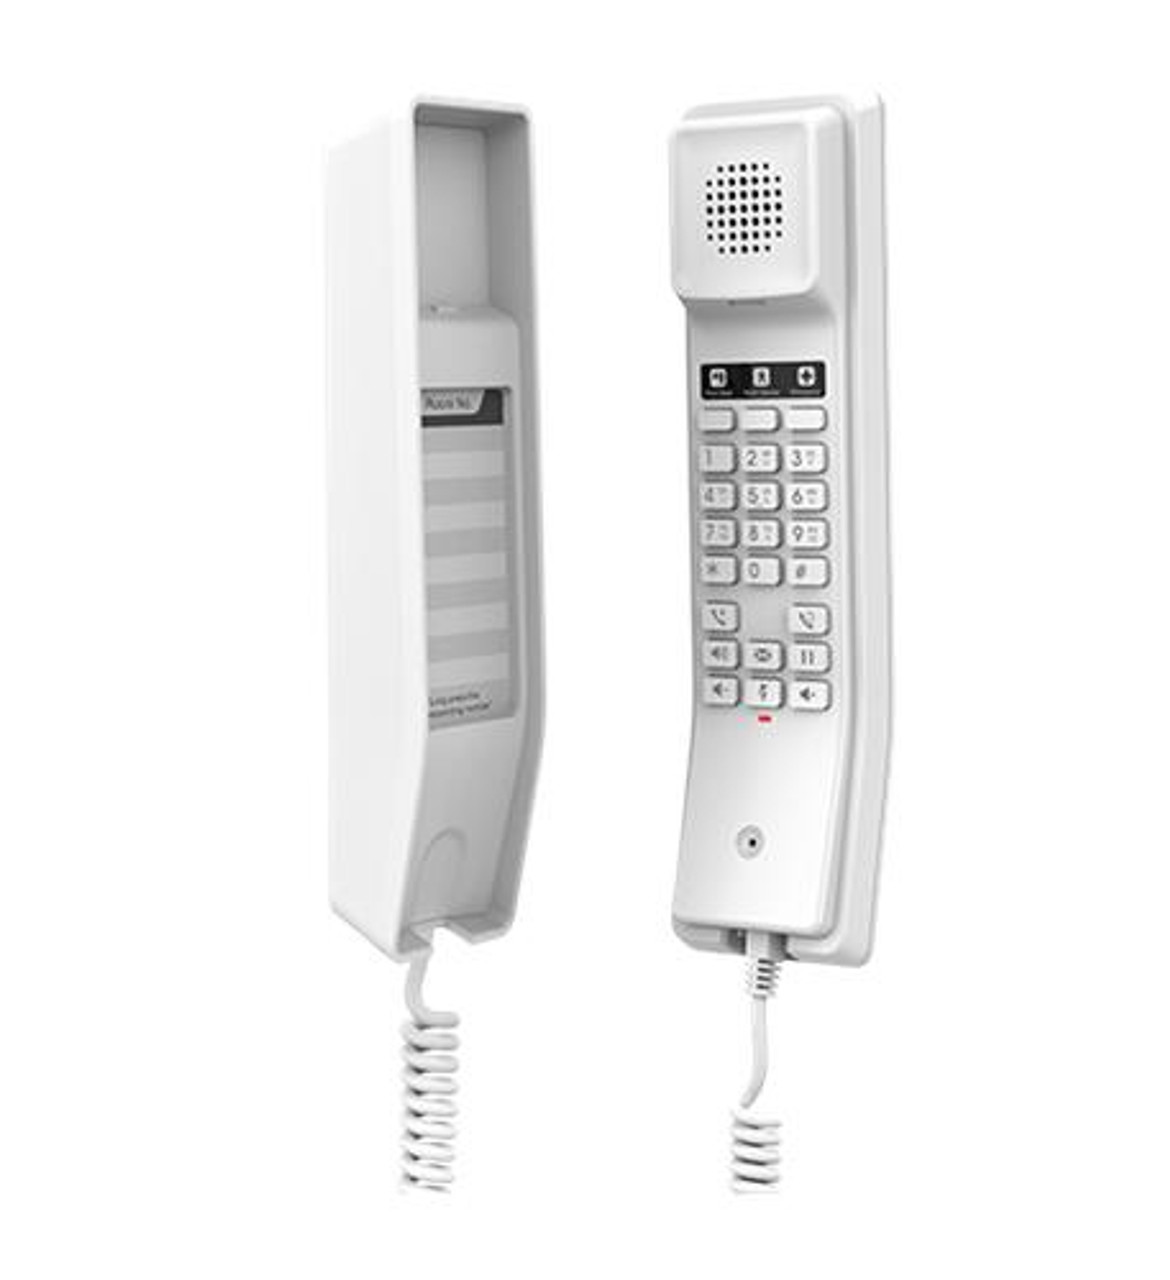 GHP610W
Compact Hotel Phone w/built-in WiFi -